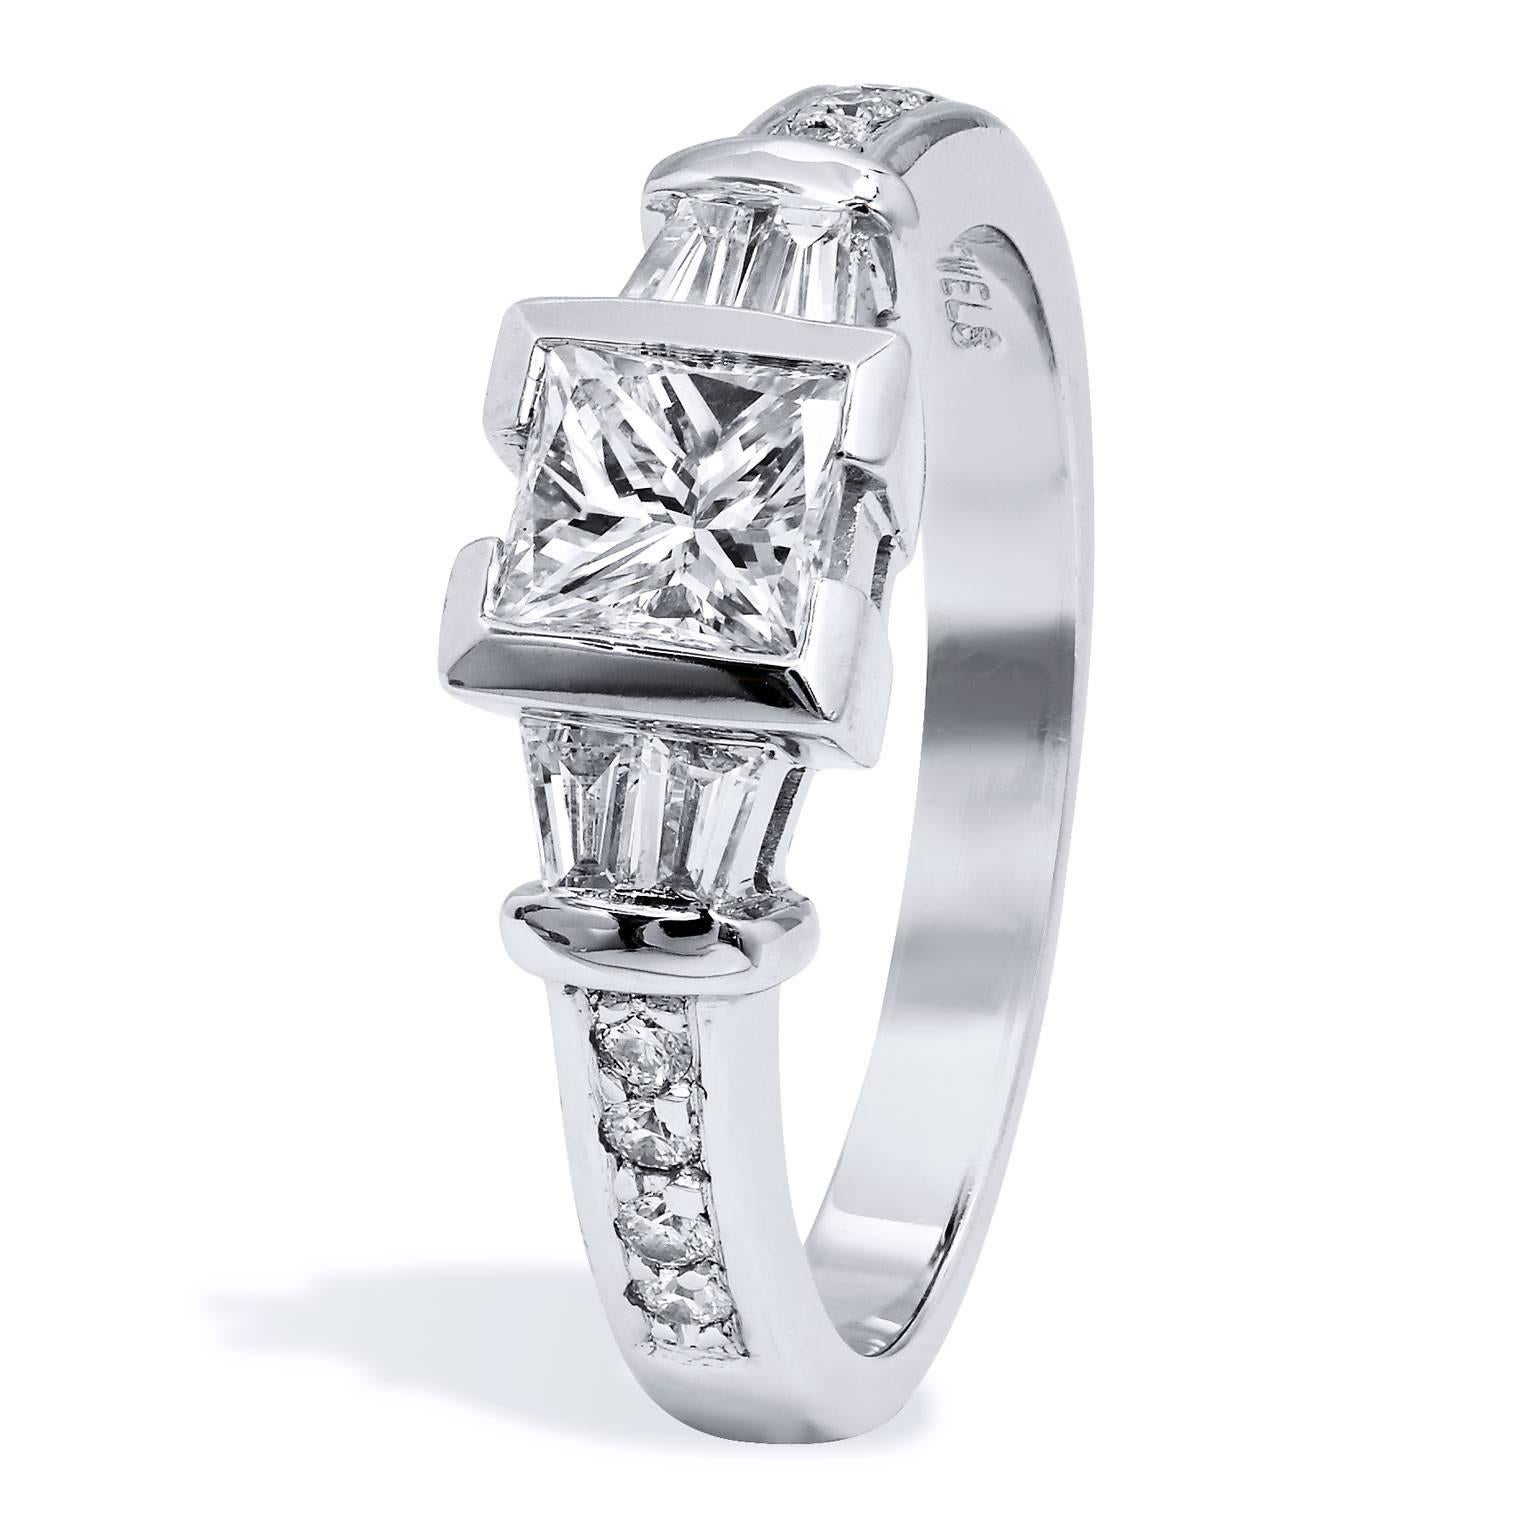 Handmade GIA Certified Semi-Bezel Princess Cut Diamond Platinum Engagement Ring

This is a one of a kind, handmade engagement ring.  

An engagement ring for a bold and decisive woman. Geometry in symmetry meld together in a fluid arrangement as